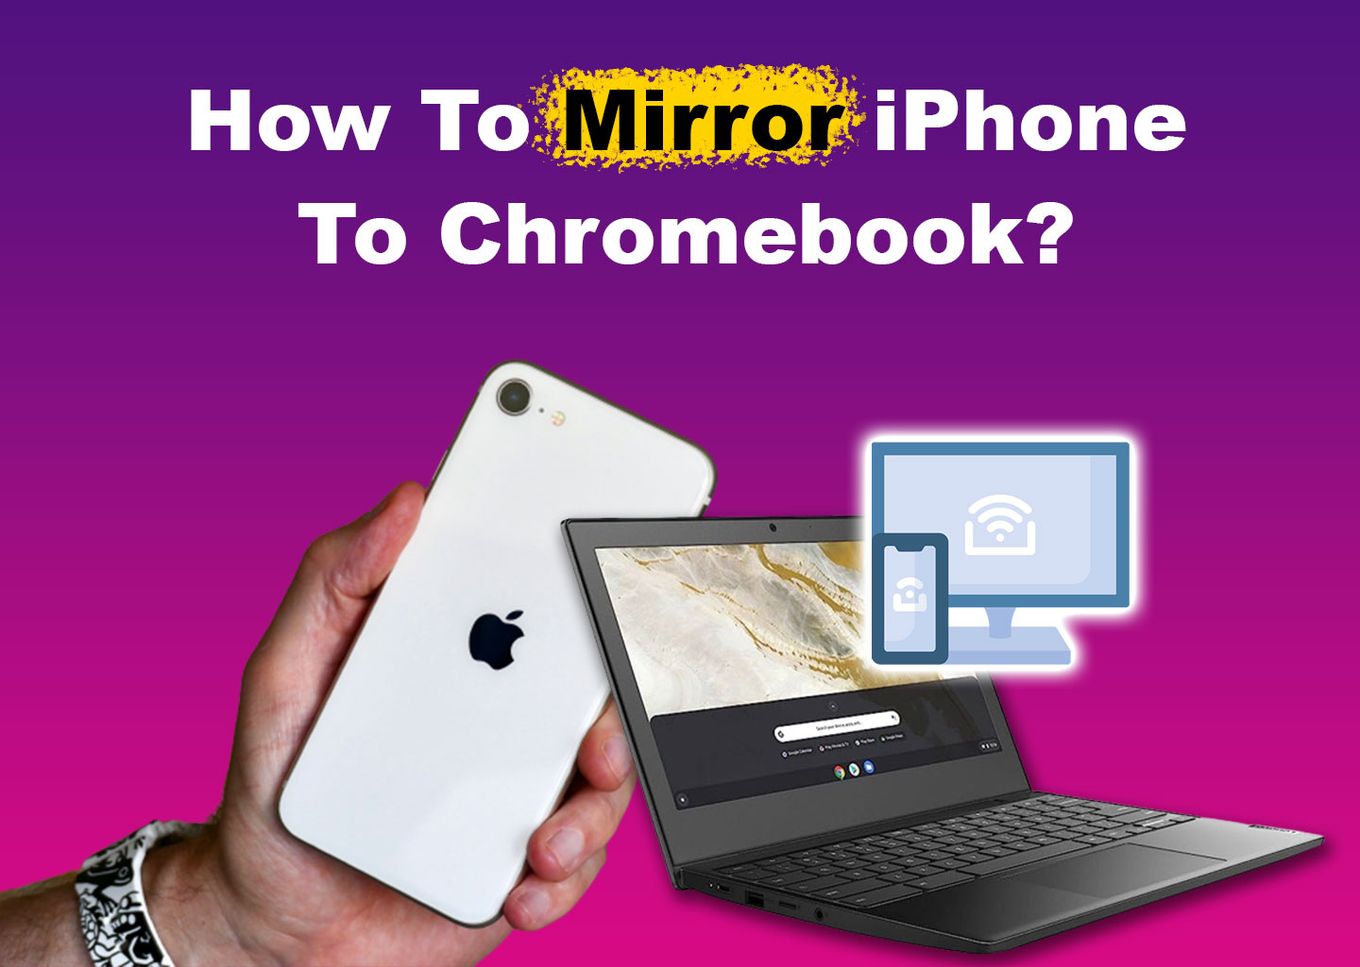 How To Mirror iPhone To Chromebook